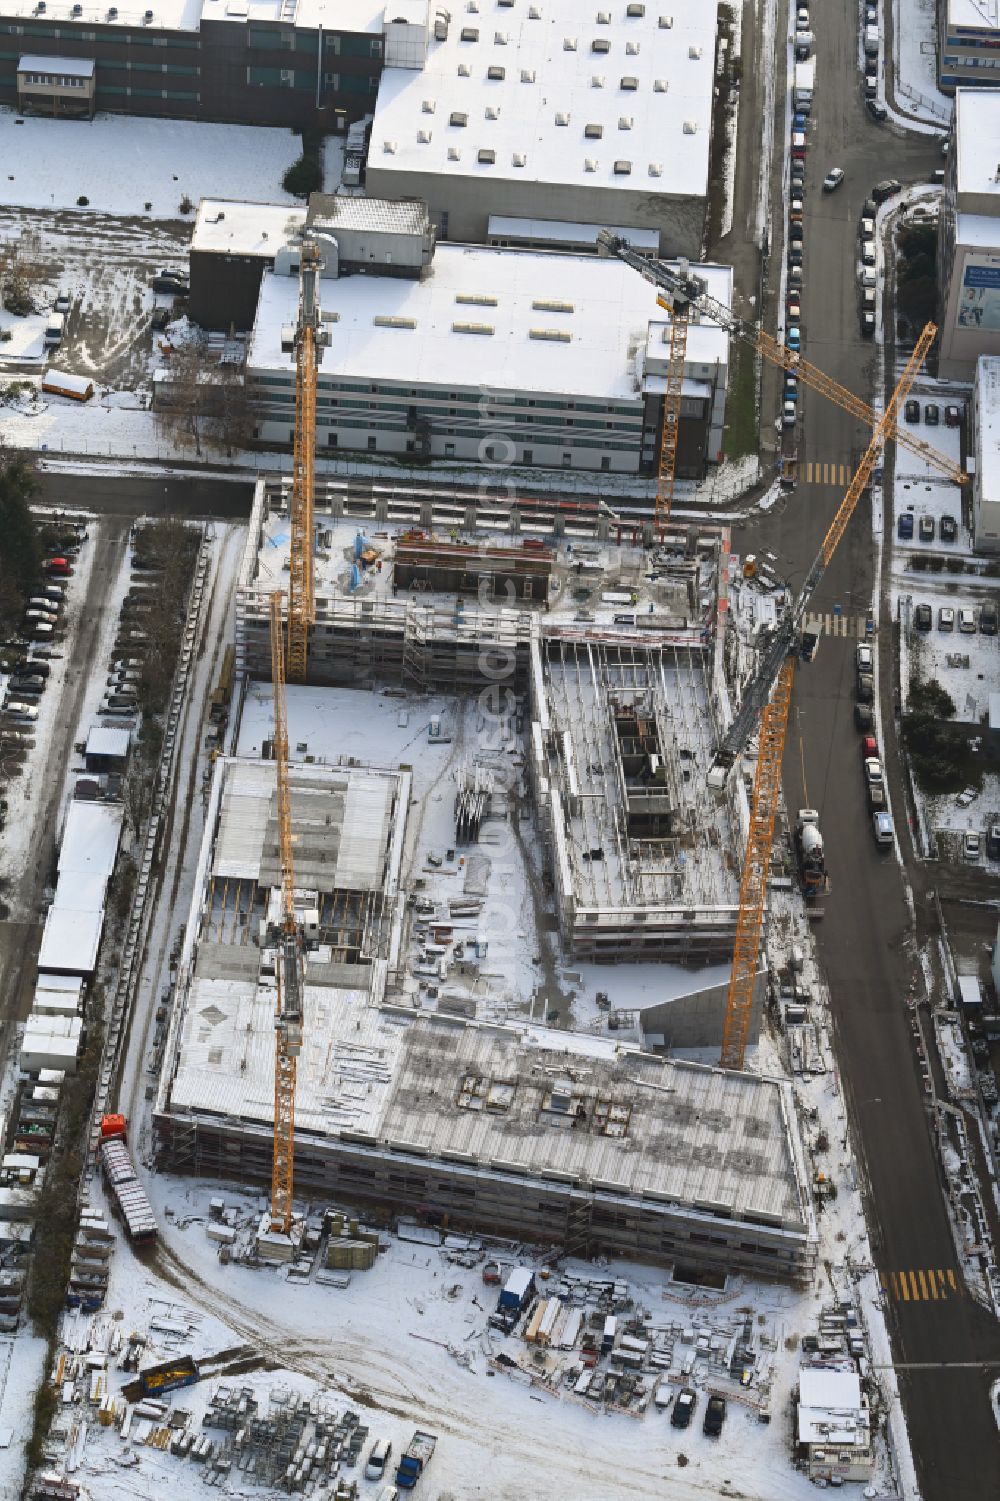 Aerial image Berlin - Wintry snowy construction site to build a new office and commercial building INK Berlin - Inspire Neukoelln on Ballinstrasse - Woermannkehre in the district Neukoelln in Berlin, Germany